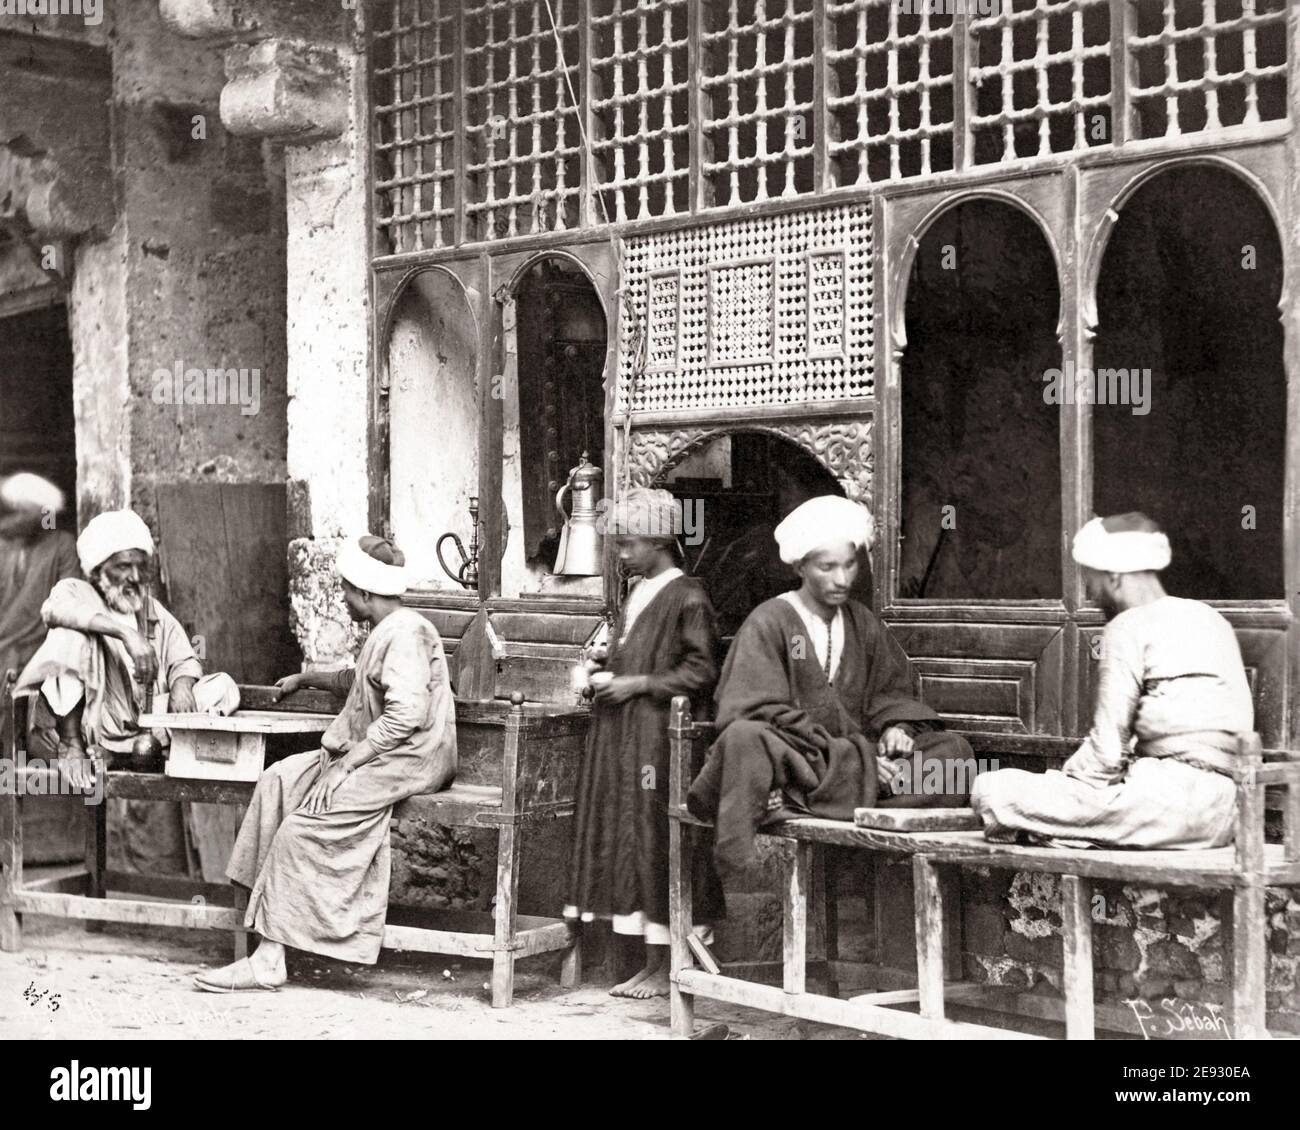 Late 19th century photograph - Street Cafe, Egypt, men playing board games. Stock Photo